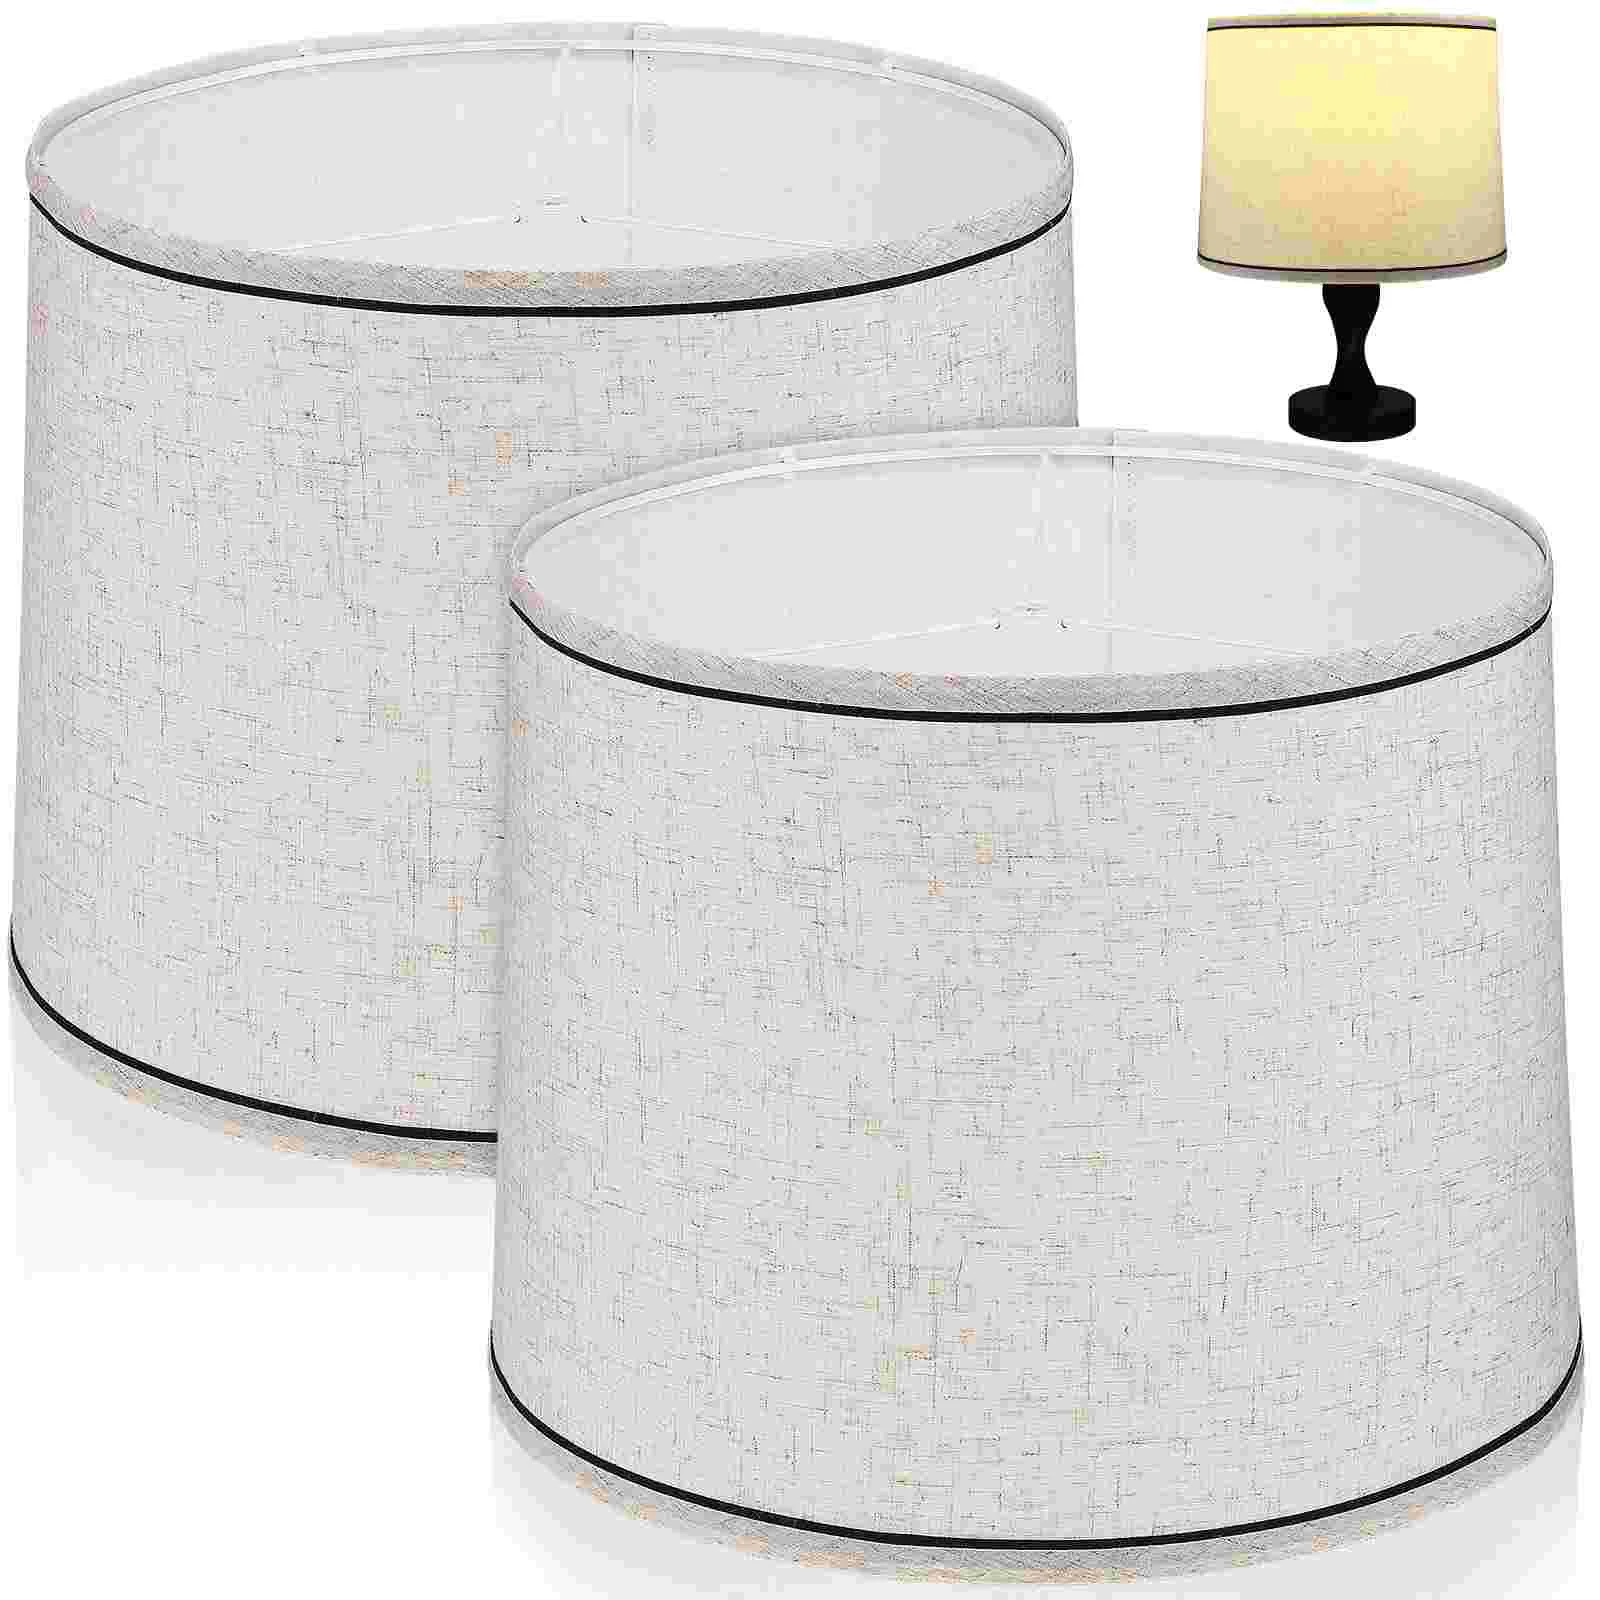 2pcs drum lampshades replacement easy assembly linen lamp shades for table lampss floor lamps 2Pcs Drum Lampshades Replacement Easy Assembly Linen Lamp Shades For Table Lampss Floor Lamps